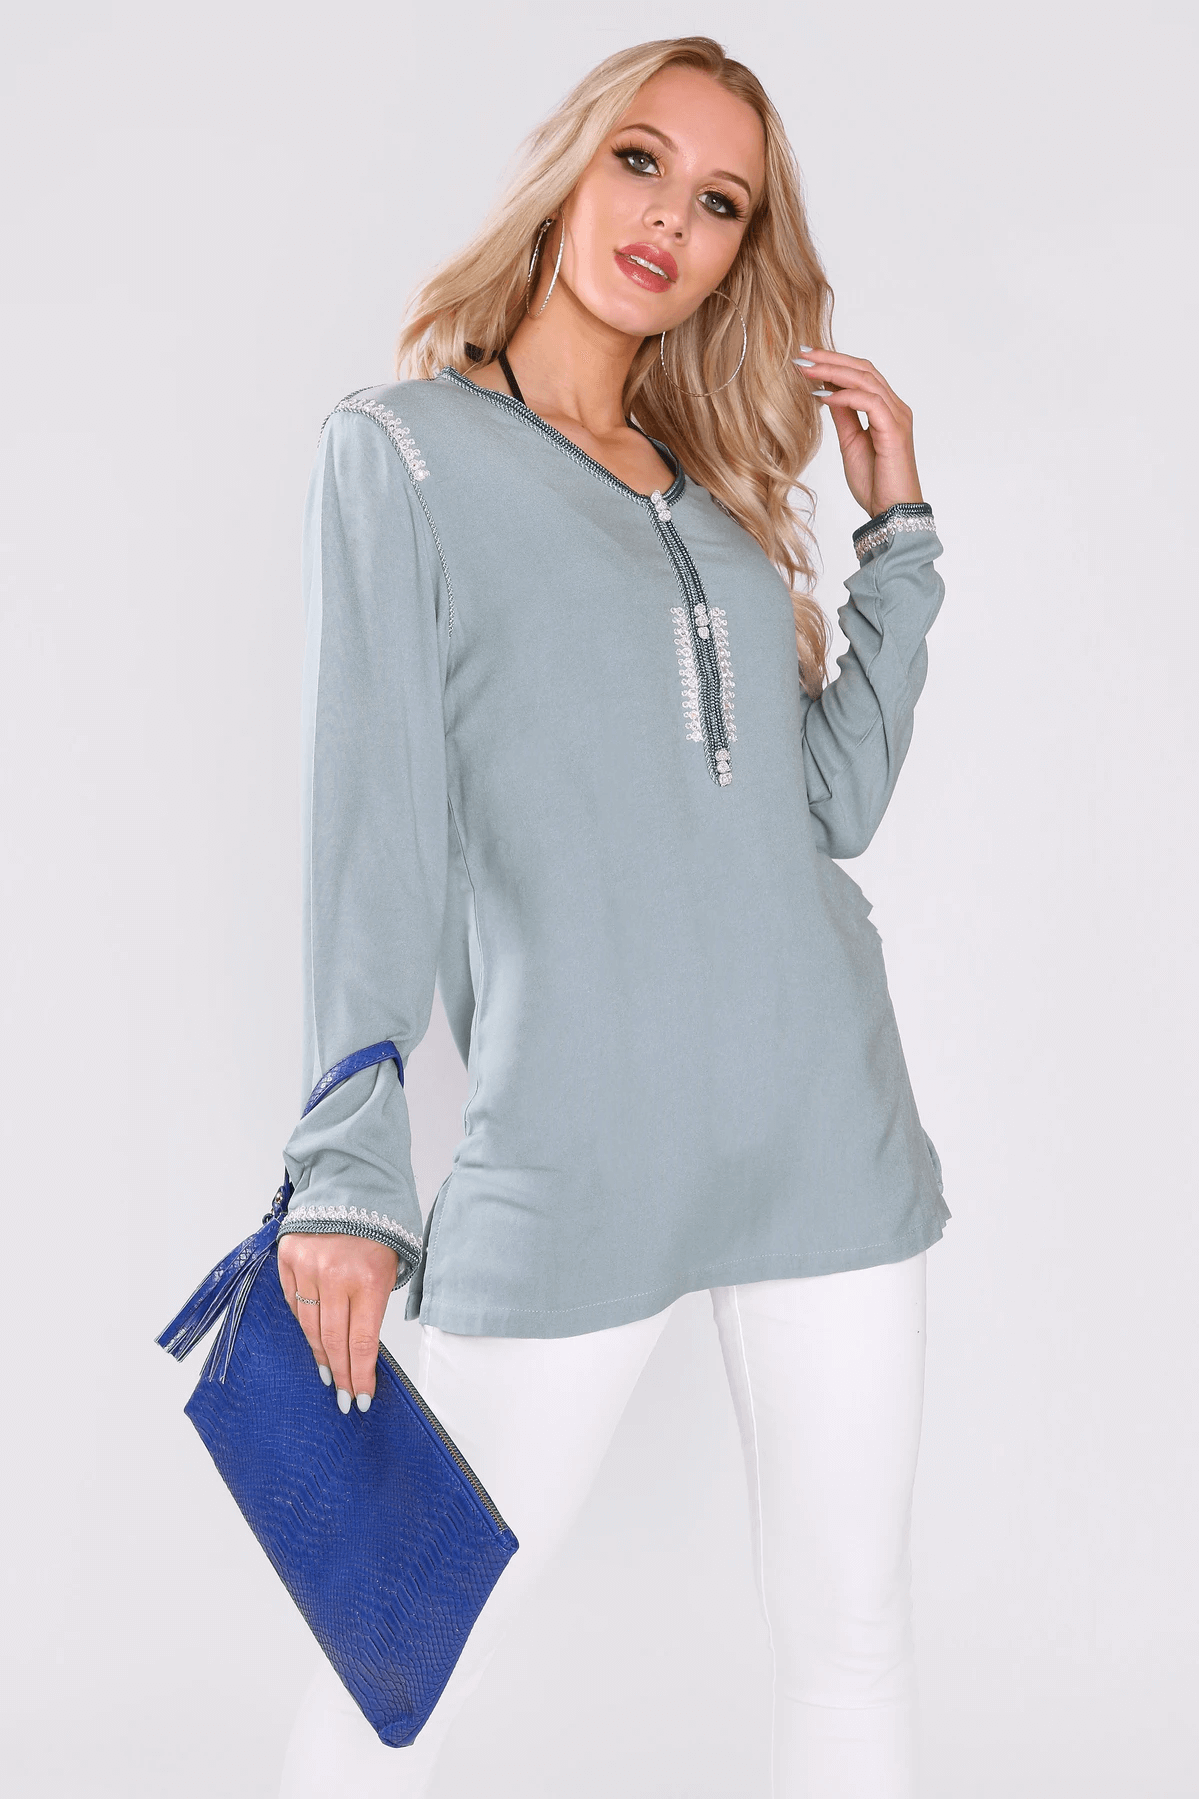 Dream Longline V-Neck Embroidered Shoulder Casual Long Sleeve Top in Blue